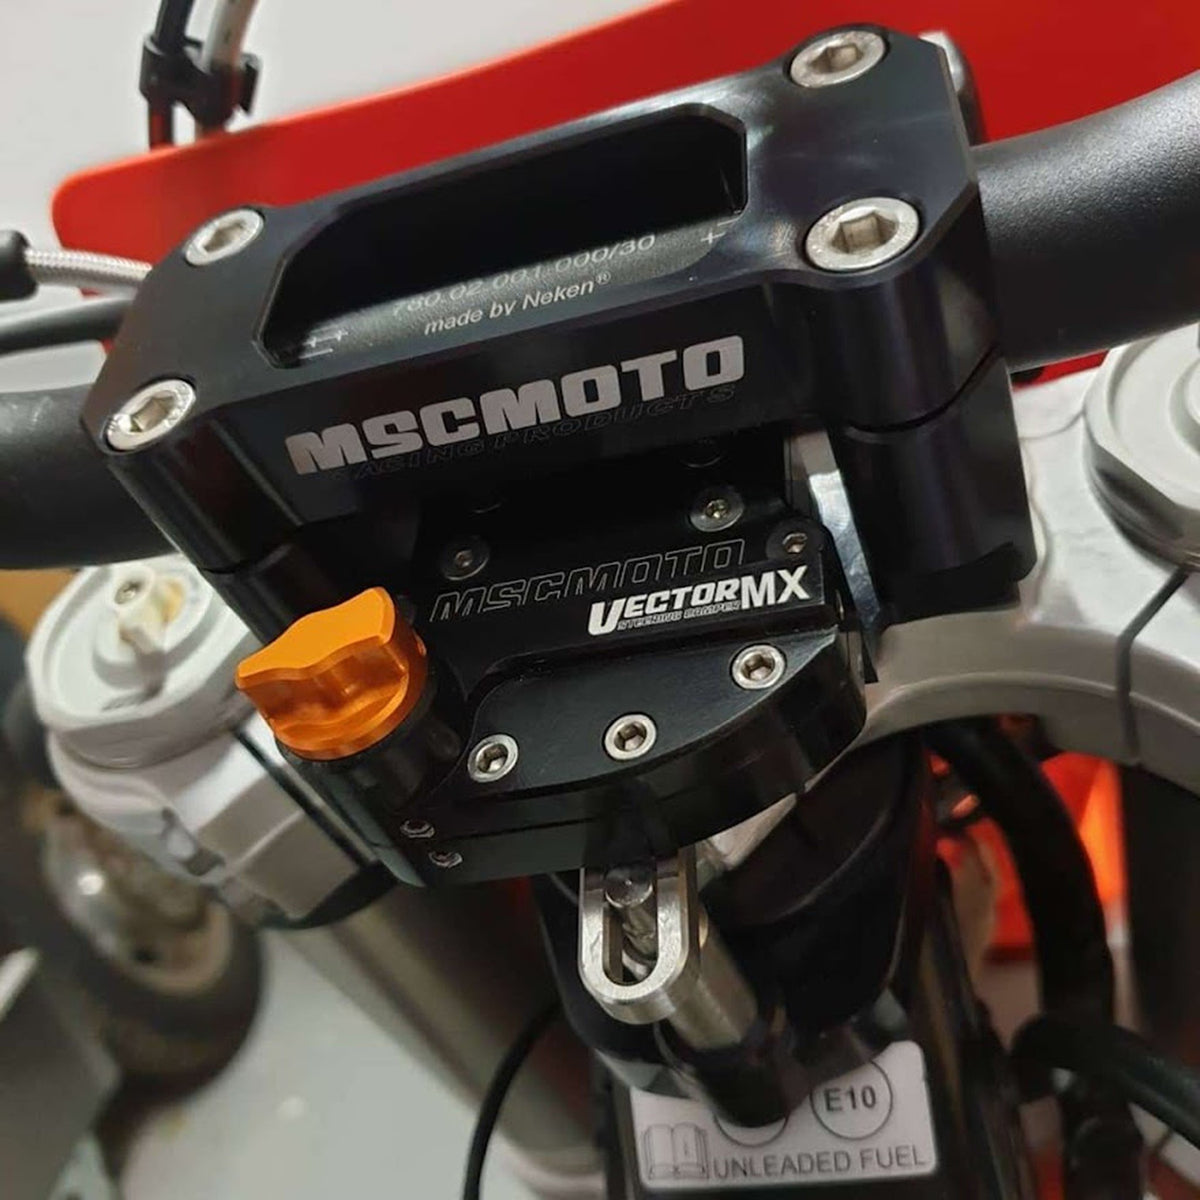 VectorMX Steering Damper Kit &quot;Down Under&quot; Mount (VEC0001) - GAS GAS (EC, MC) KTM (EXC, SXF) HUSQVARNA (TC, TE, FC, FE) HUSABERG (FE, FX, TE), VEC0001, Gas Gas MSC Moto, Husaberg MSC Moto, Husqvarna MSC Moto, KTM MSC Moto, vectormx, Steering Dampers - Imported and distributed in North &amp; South America by Lindeco Genuine Powersports - Premier Powersports Equipment and Accessories for Motorcycle Enthusiasts, Professional Riders and Dealers.